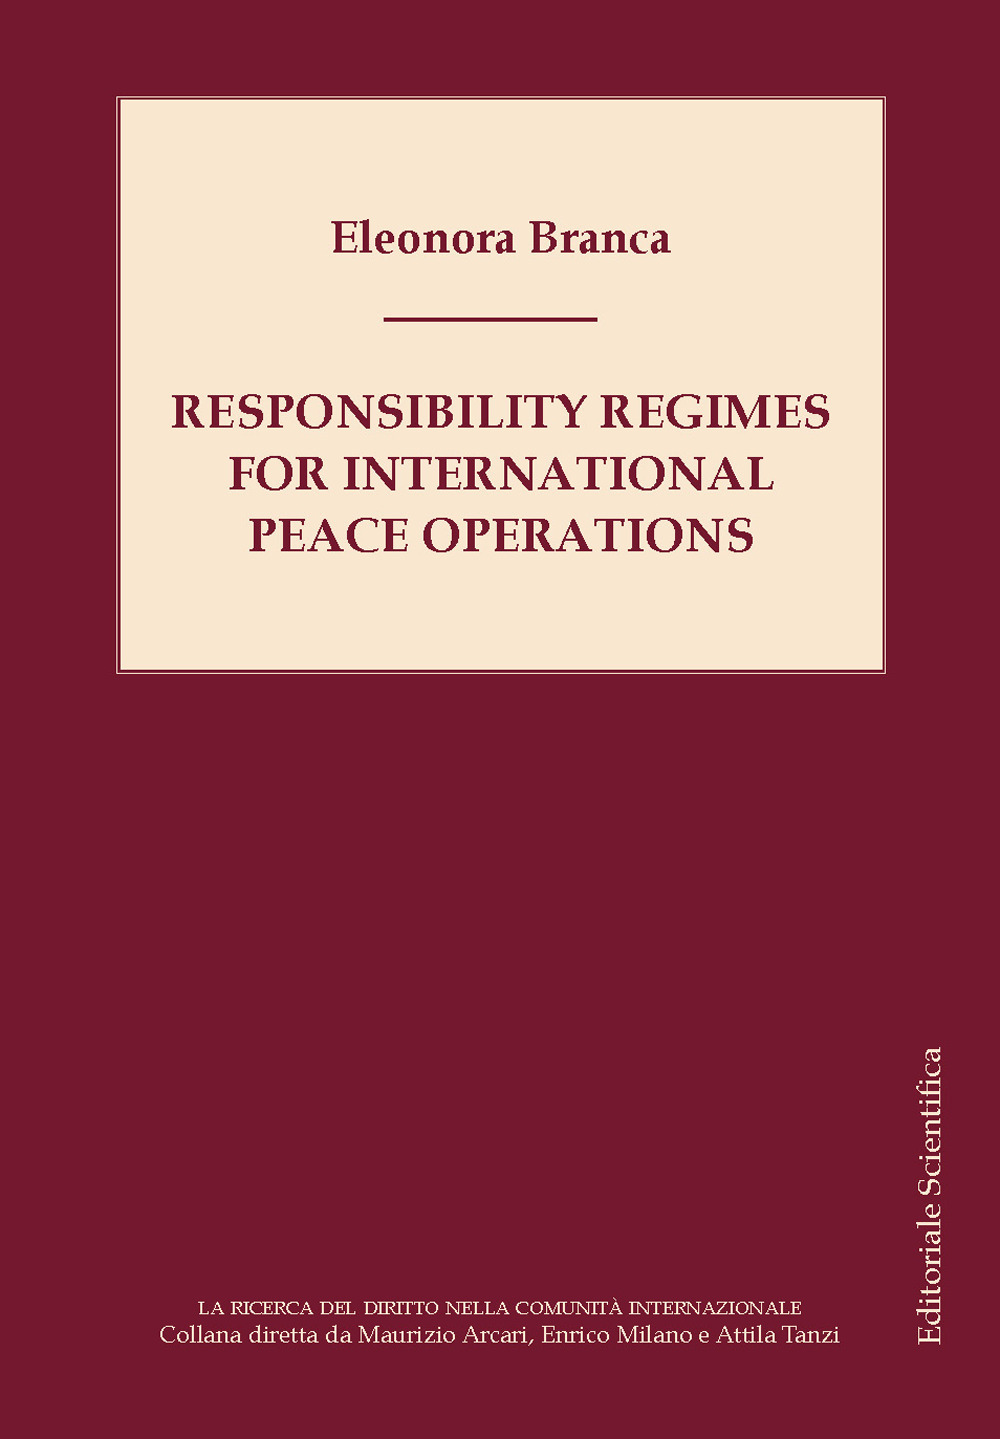 Responsibility regimes for international peace operations